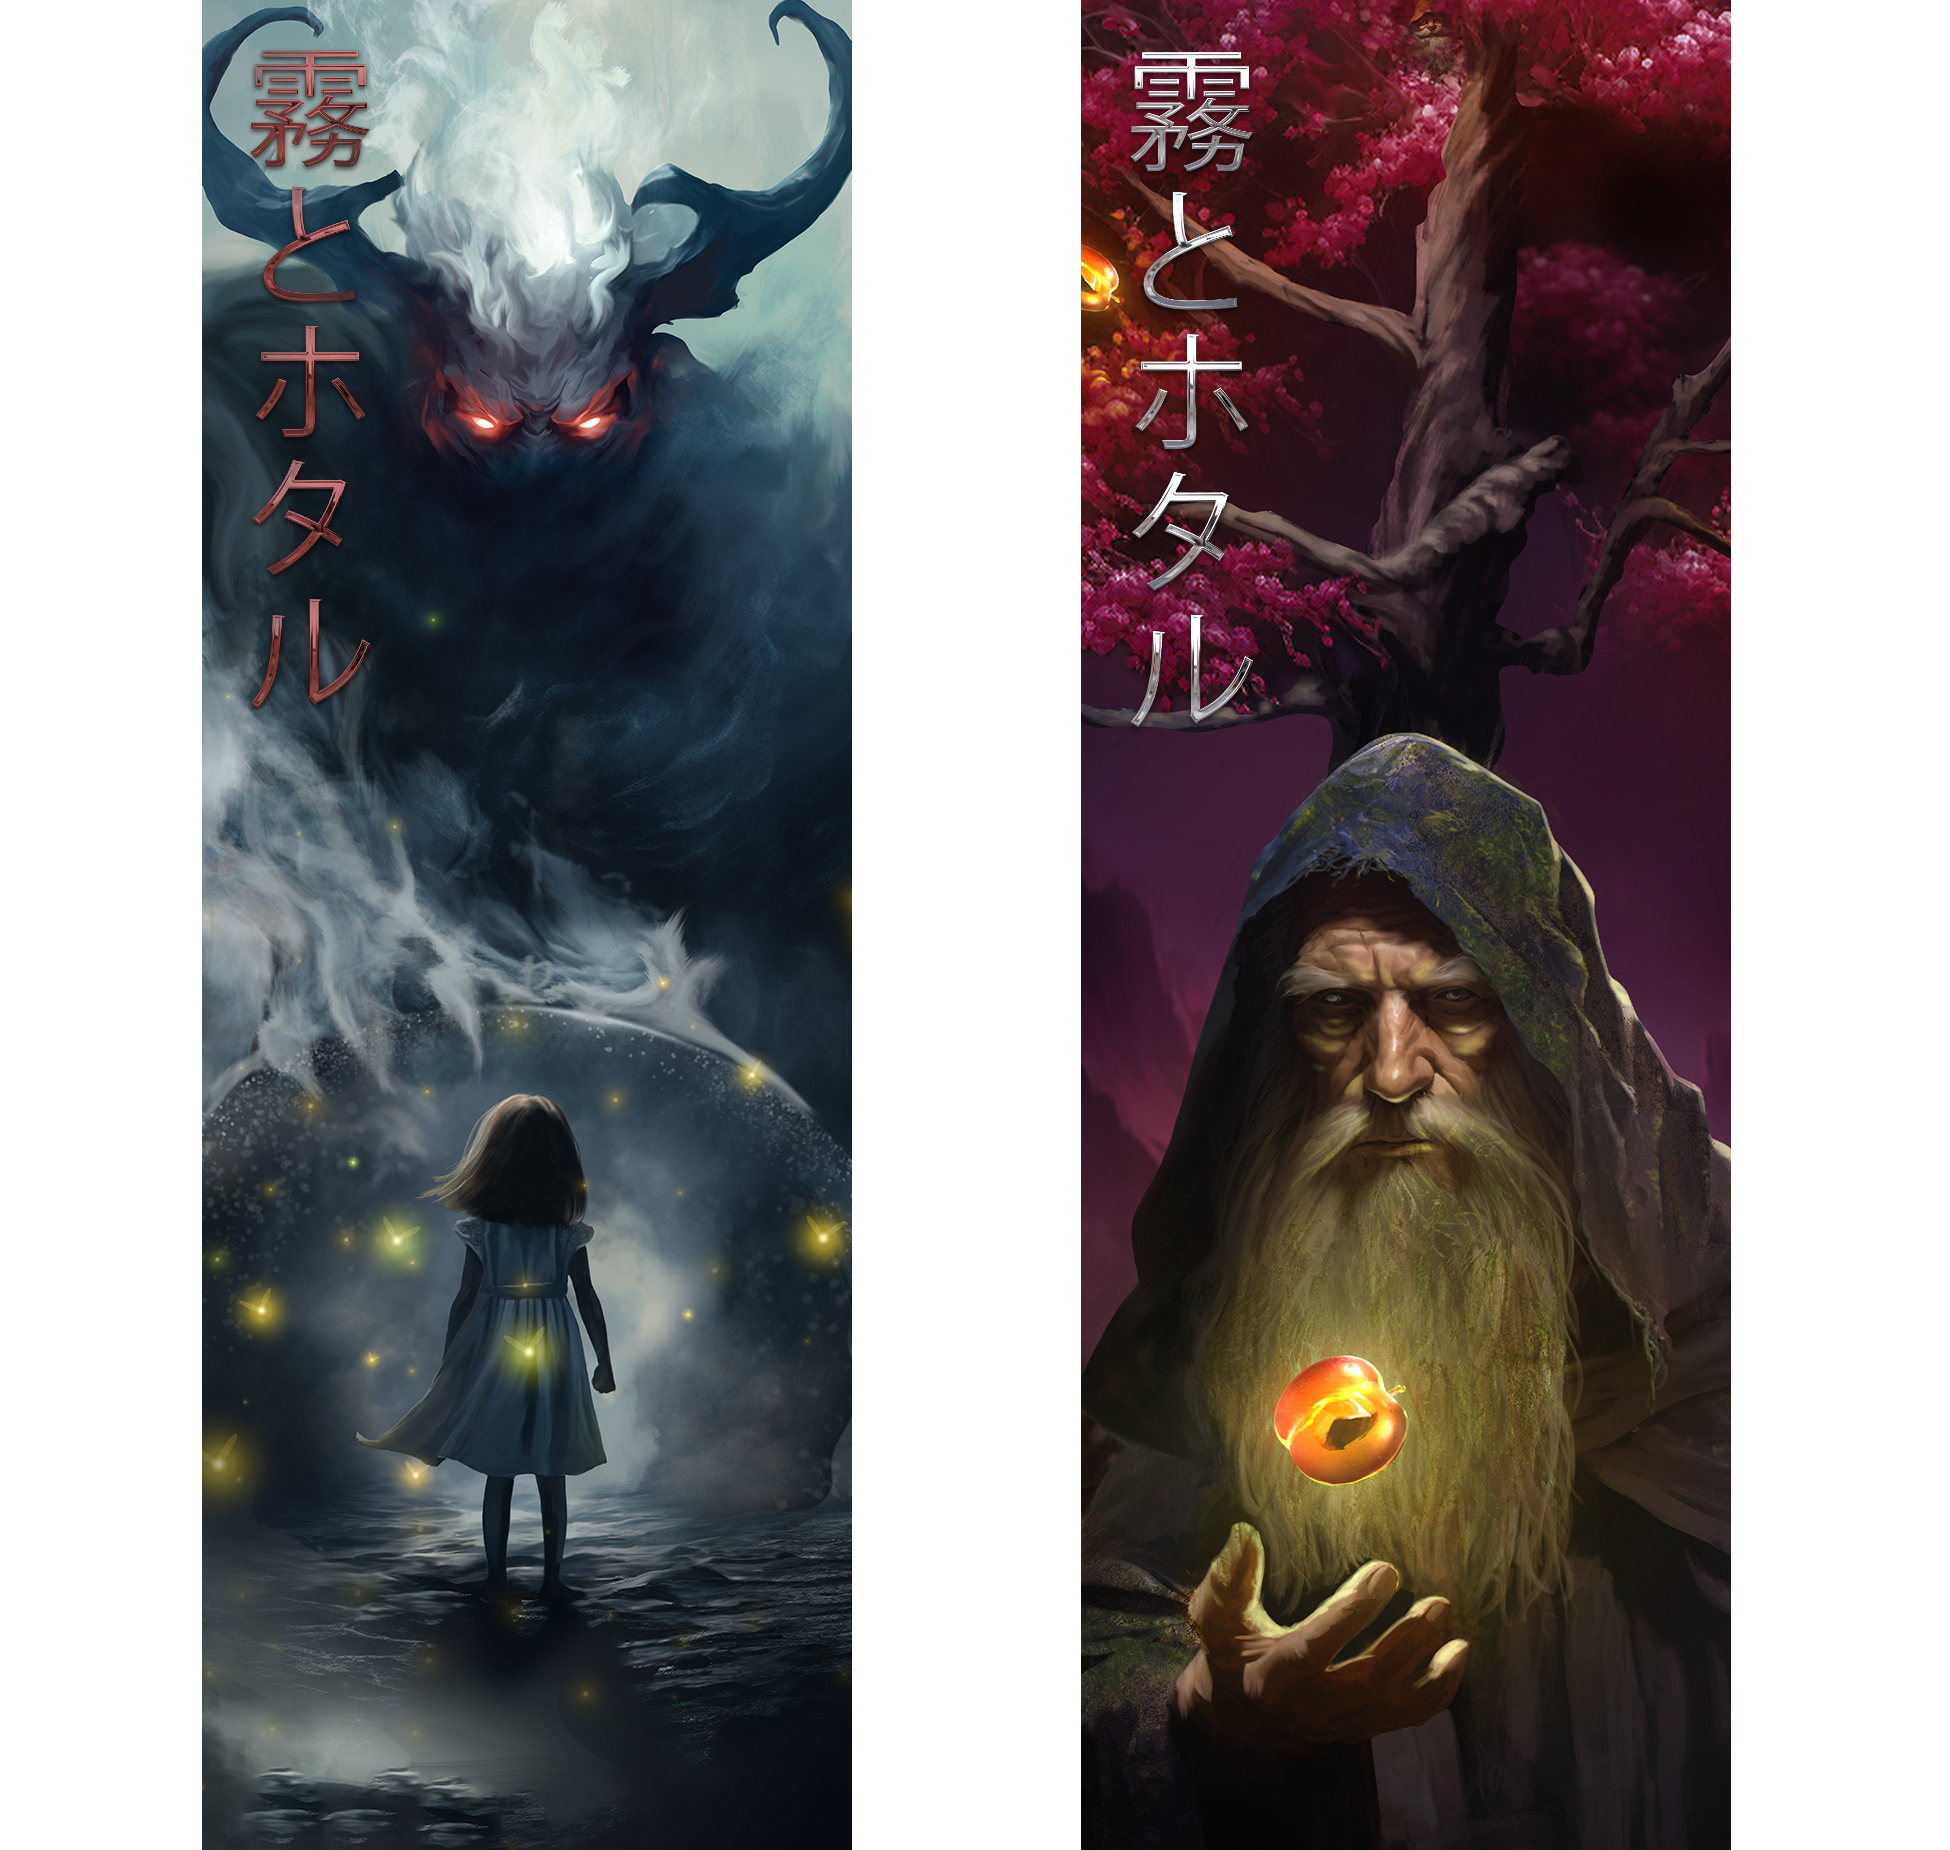 Purchase bookmarks with Fog & Fireflies in Japanese, featuring the Fog Phantom and the Blue Wizard